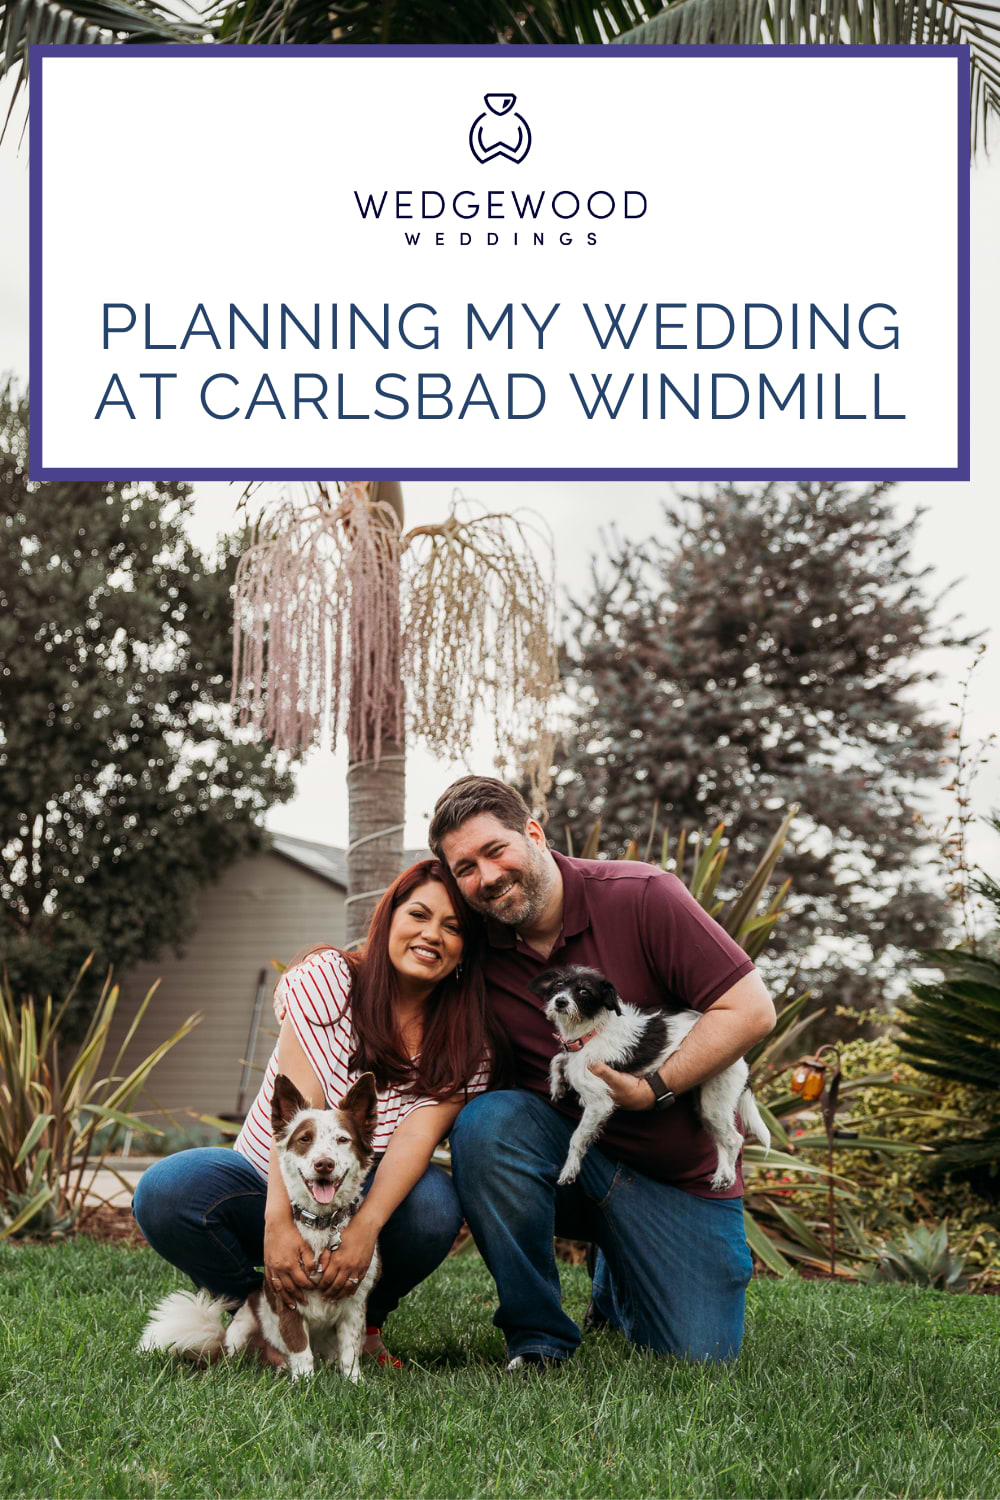 Meet the Andersons! Tania and Kirk's relationship is the definition of "opposites attract", and they are honestly the sweetest couple you'll ever meet. This is the story of how they came to choose their wedding venue, the Carlsbad Windmill by Wedgewood Weddings. With bold contemporary styling, decades of history, and a trendy food hall on the premises, the Carlsbad Windmill is the perfect choice for couples like The Andersons who are looking for a mixture of California eclectic and modern style. Tania and Kirk are now set to get married in 2022. Read along to learn more about their venue shopping and wedding planning journey!